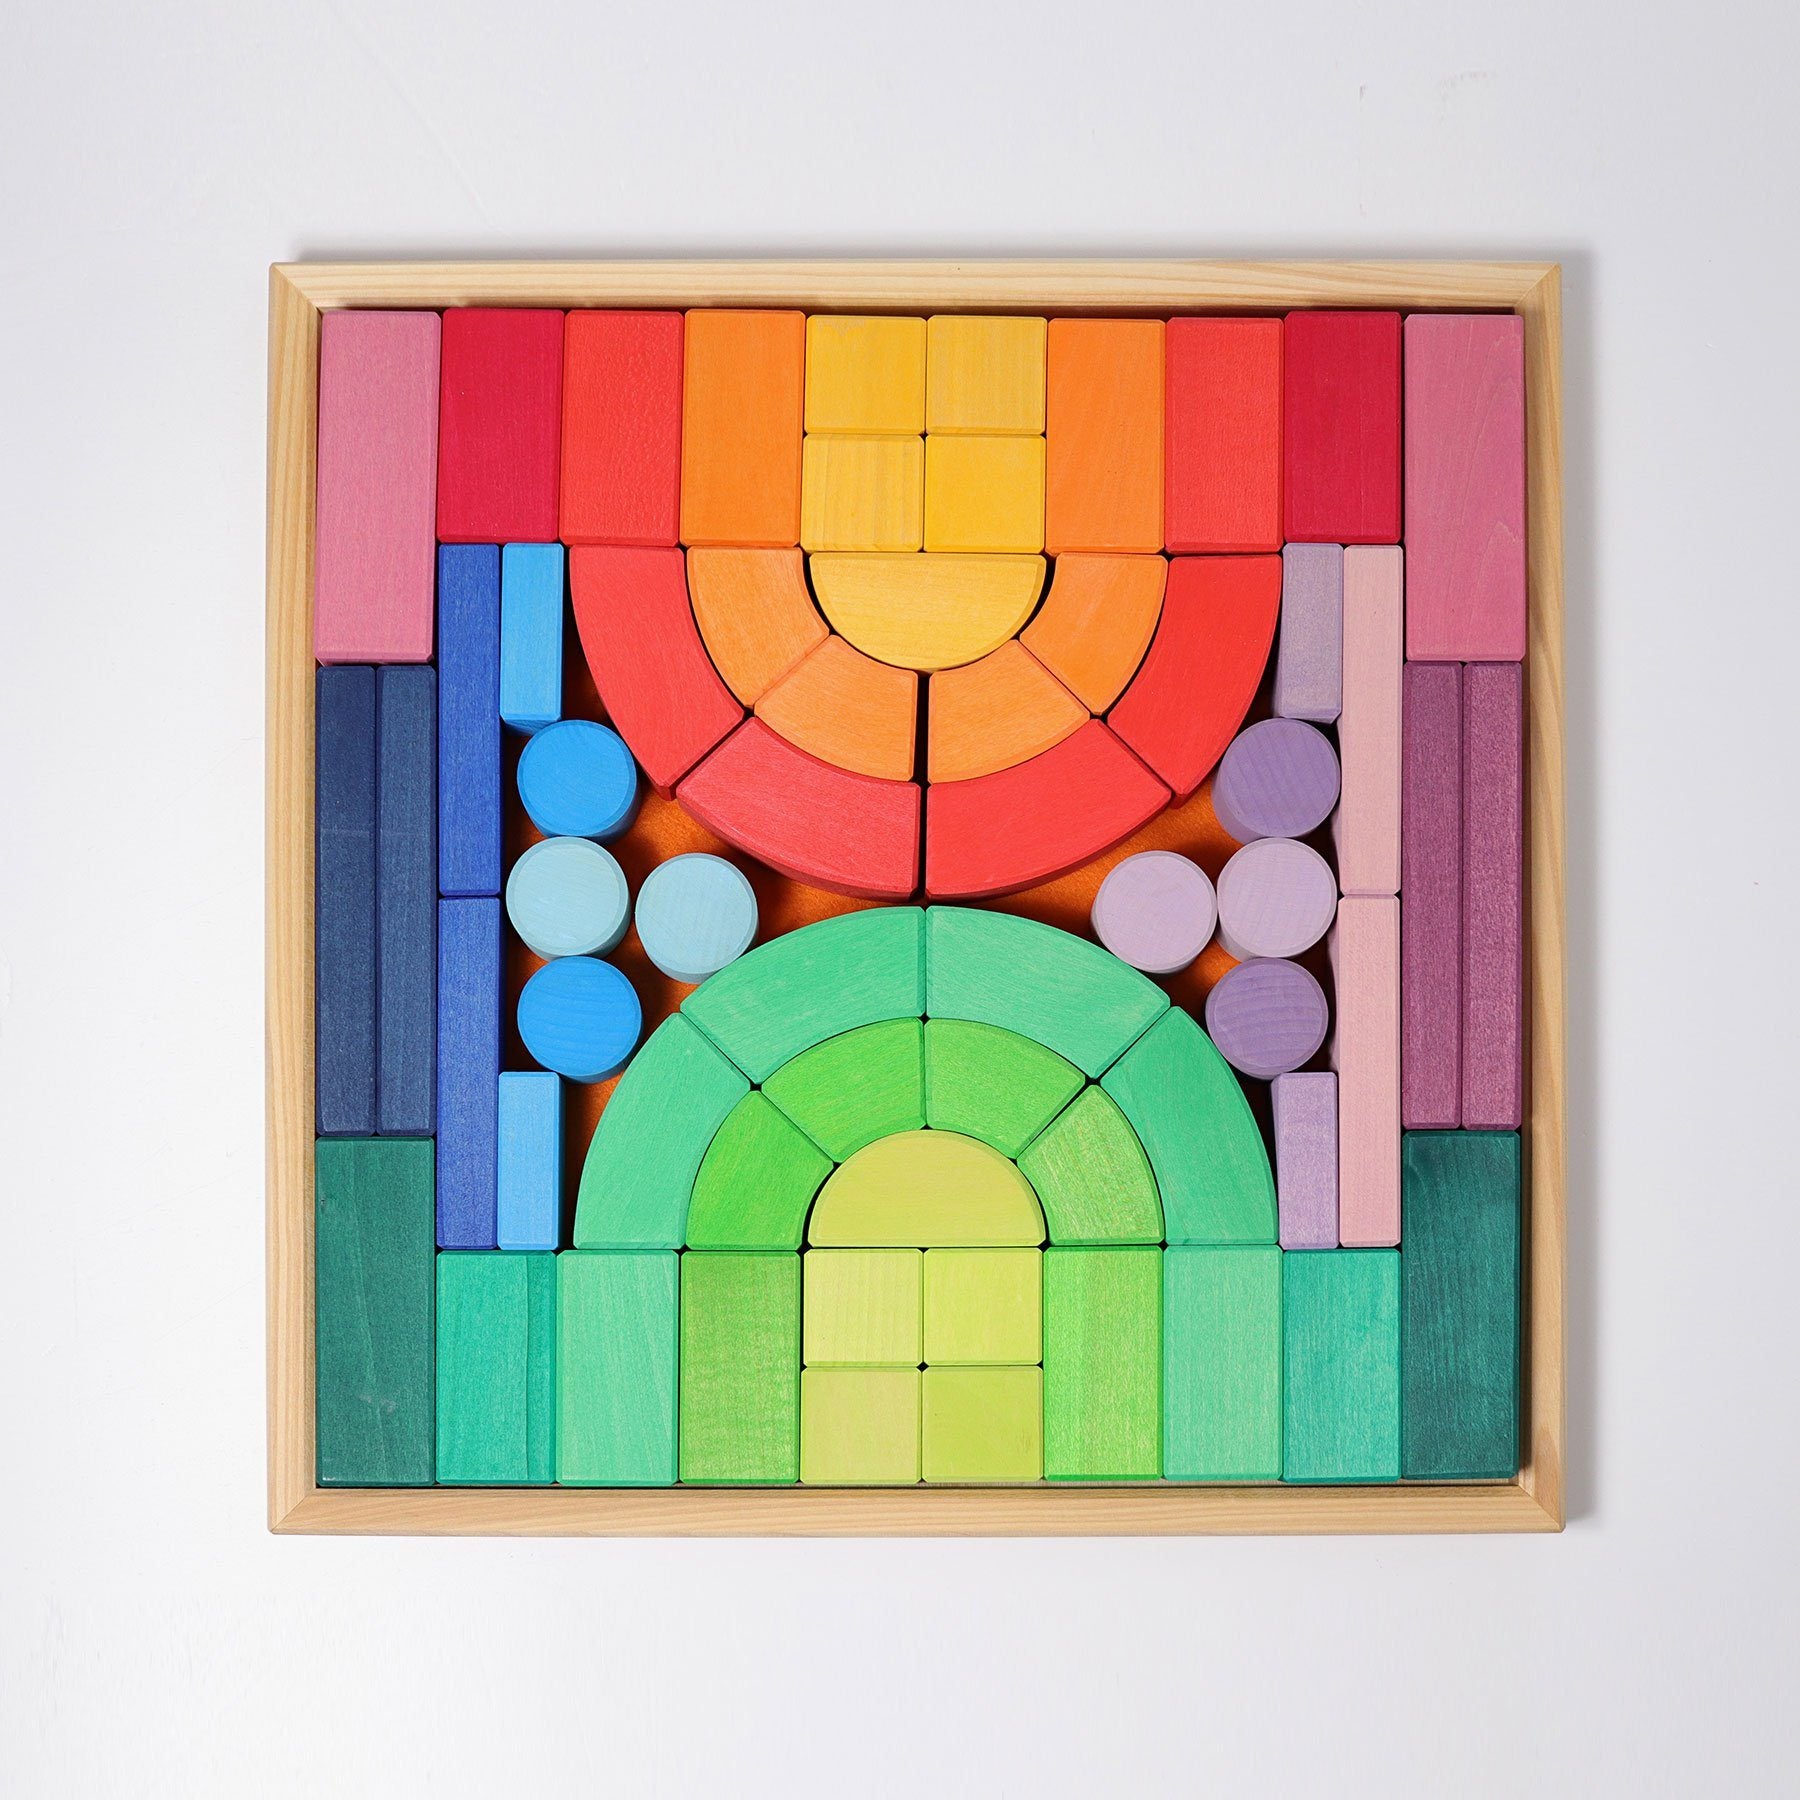 Romanesque building set in frame. Set includes 62 wooden building blocks in rainbow and pastel colors. Shapes range from pillars, rectangular blocks, square blocks, slates, and curved blocks.